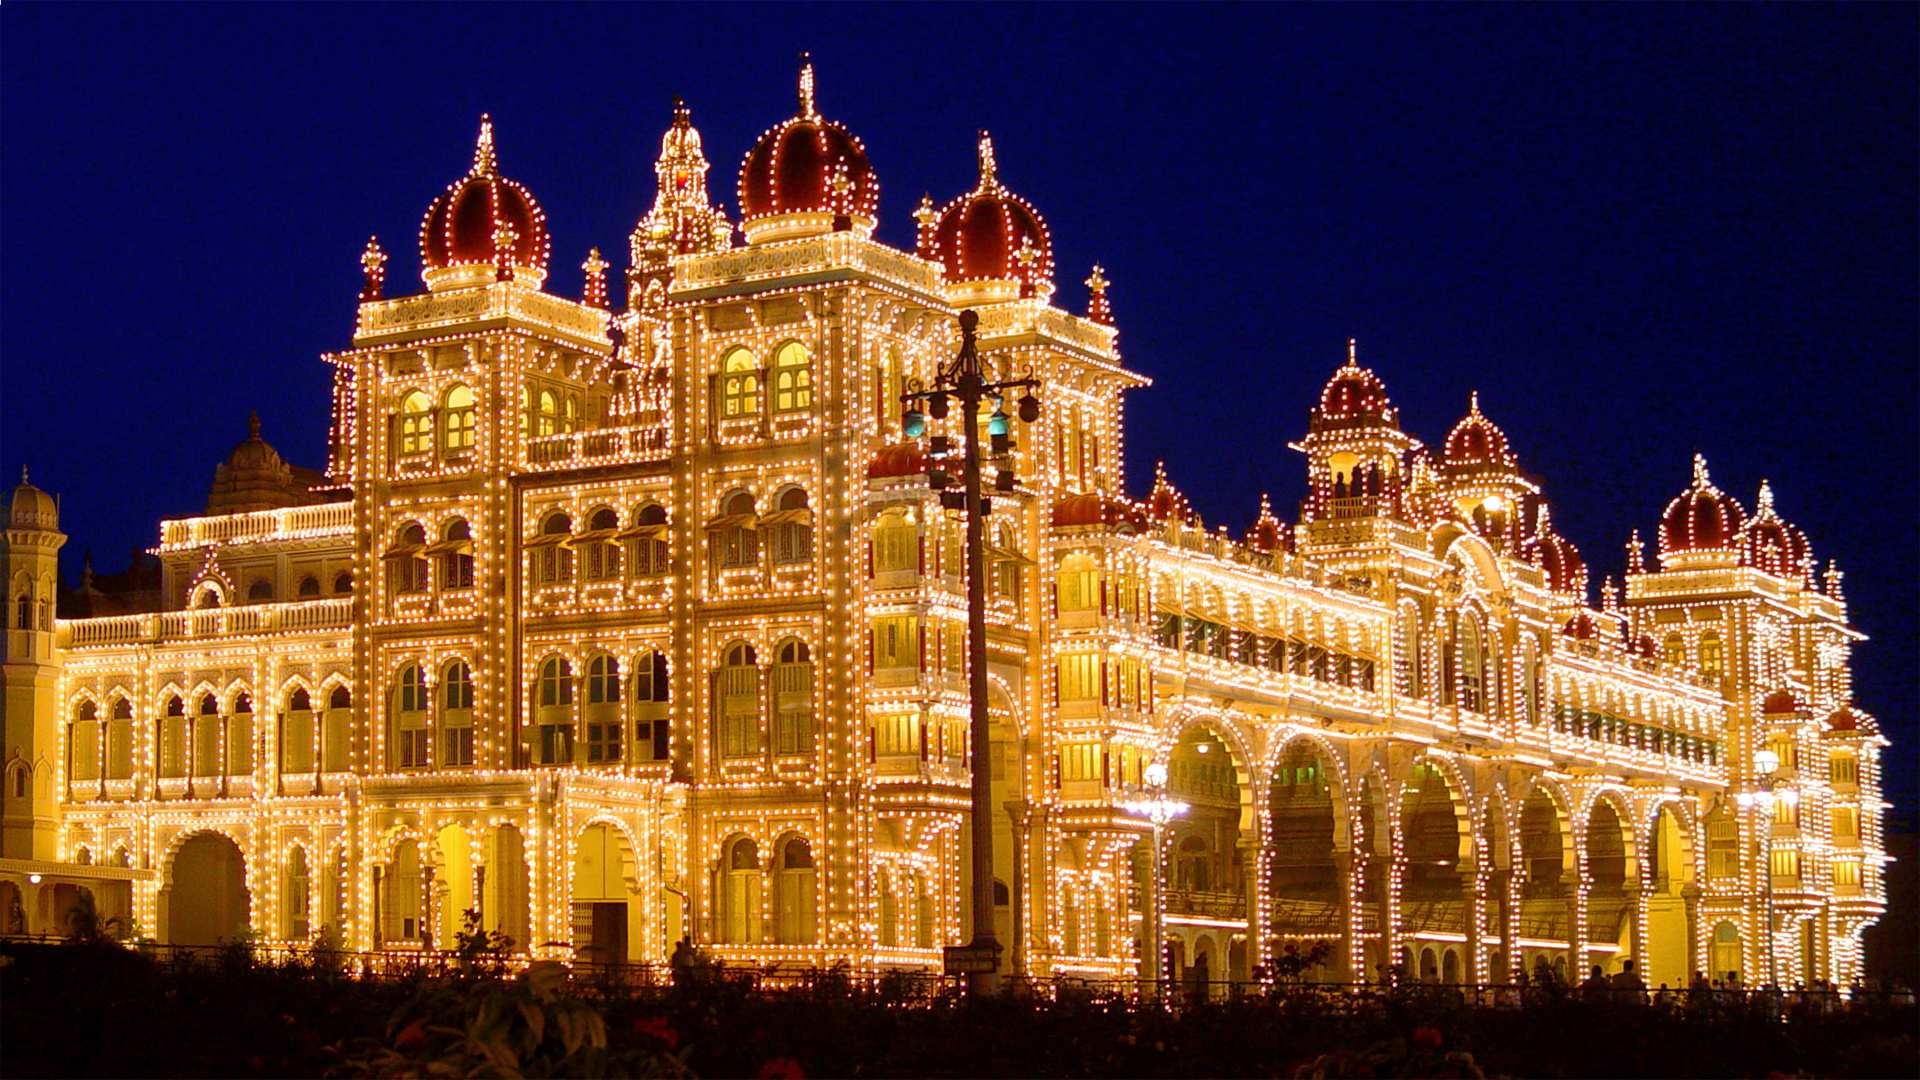 10 Most Beautiful Palaces In The World